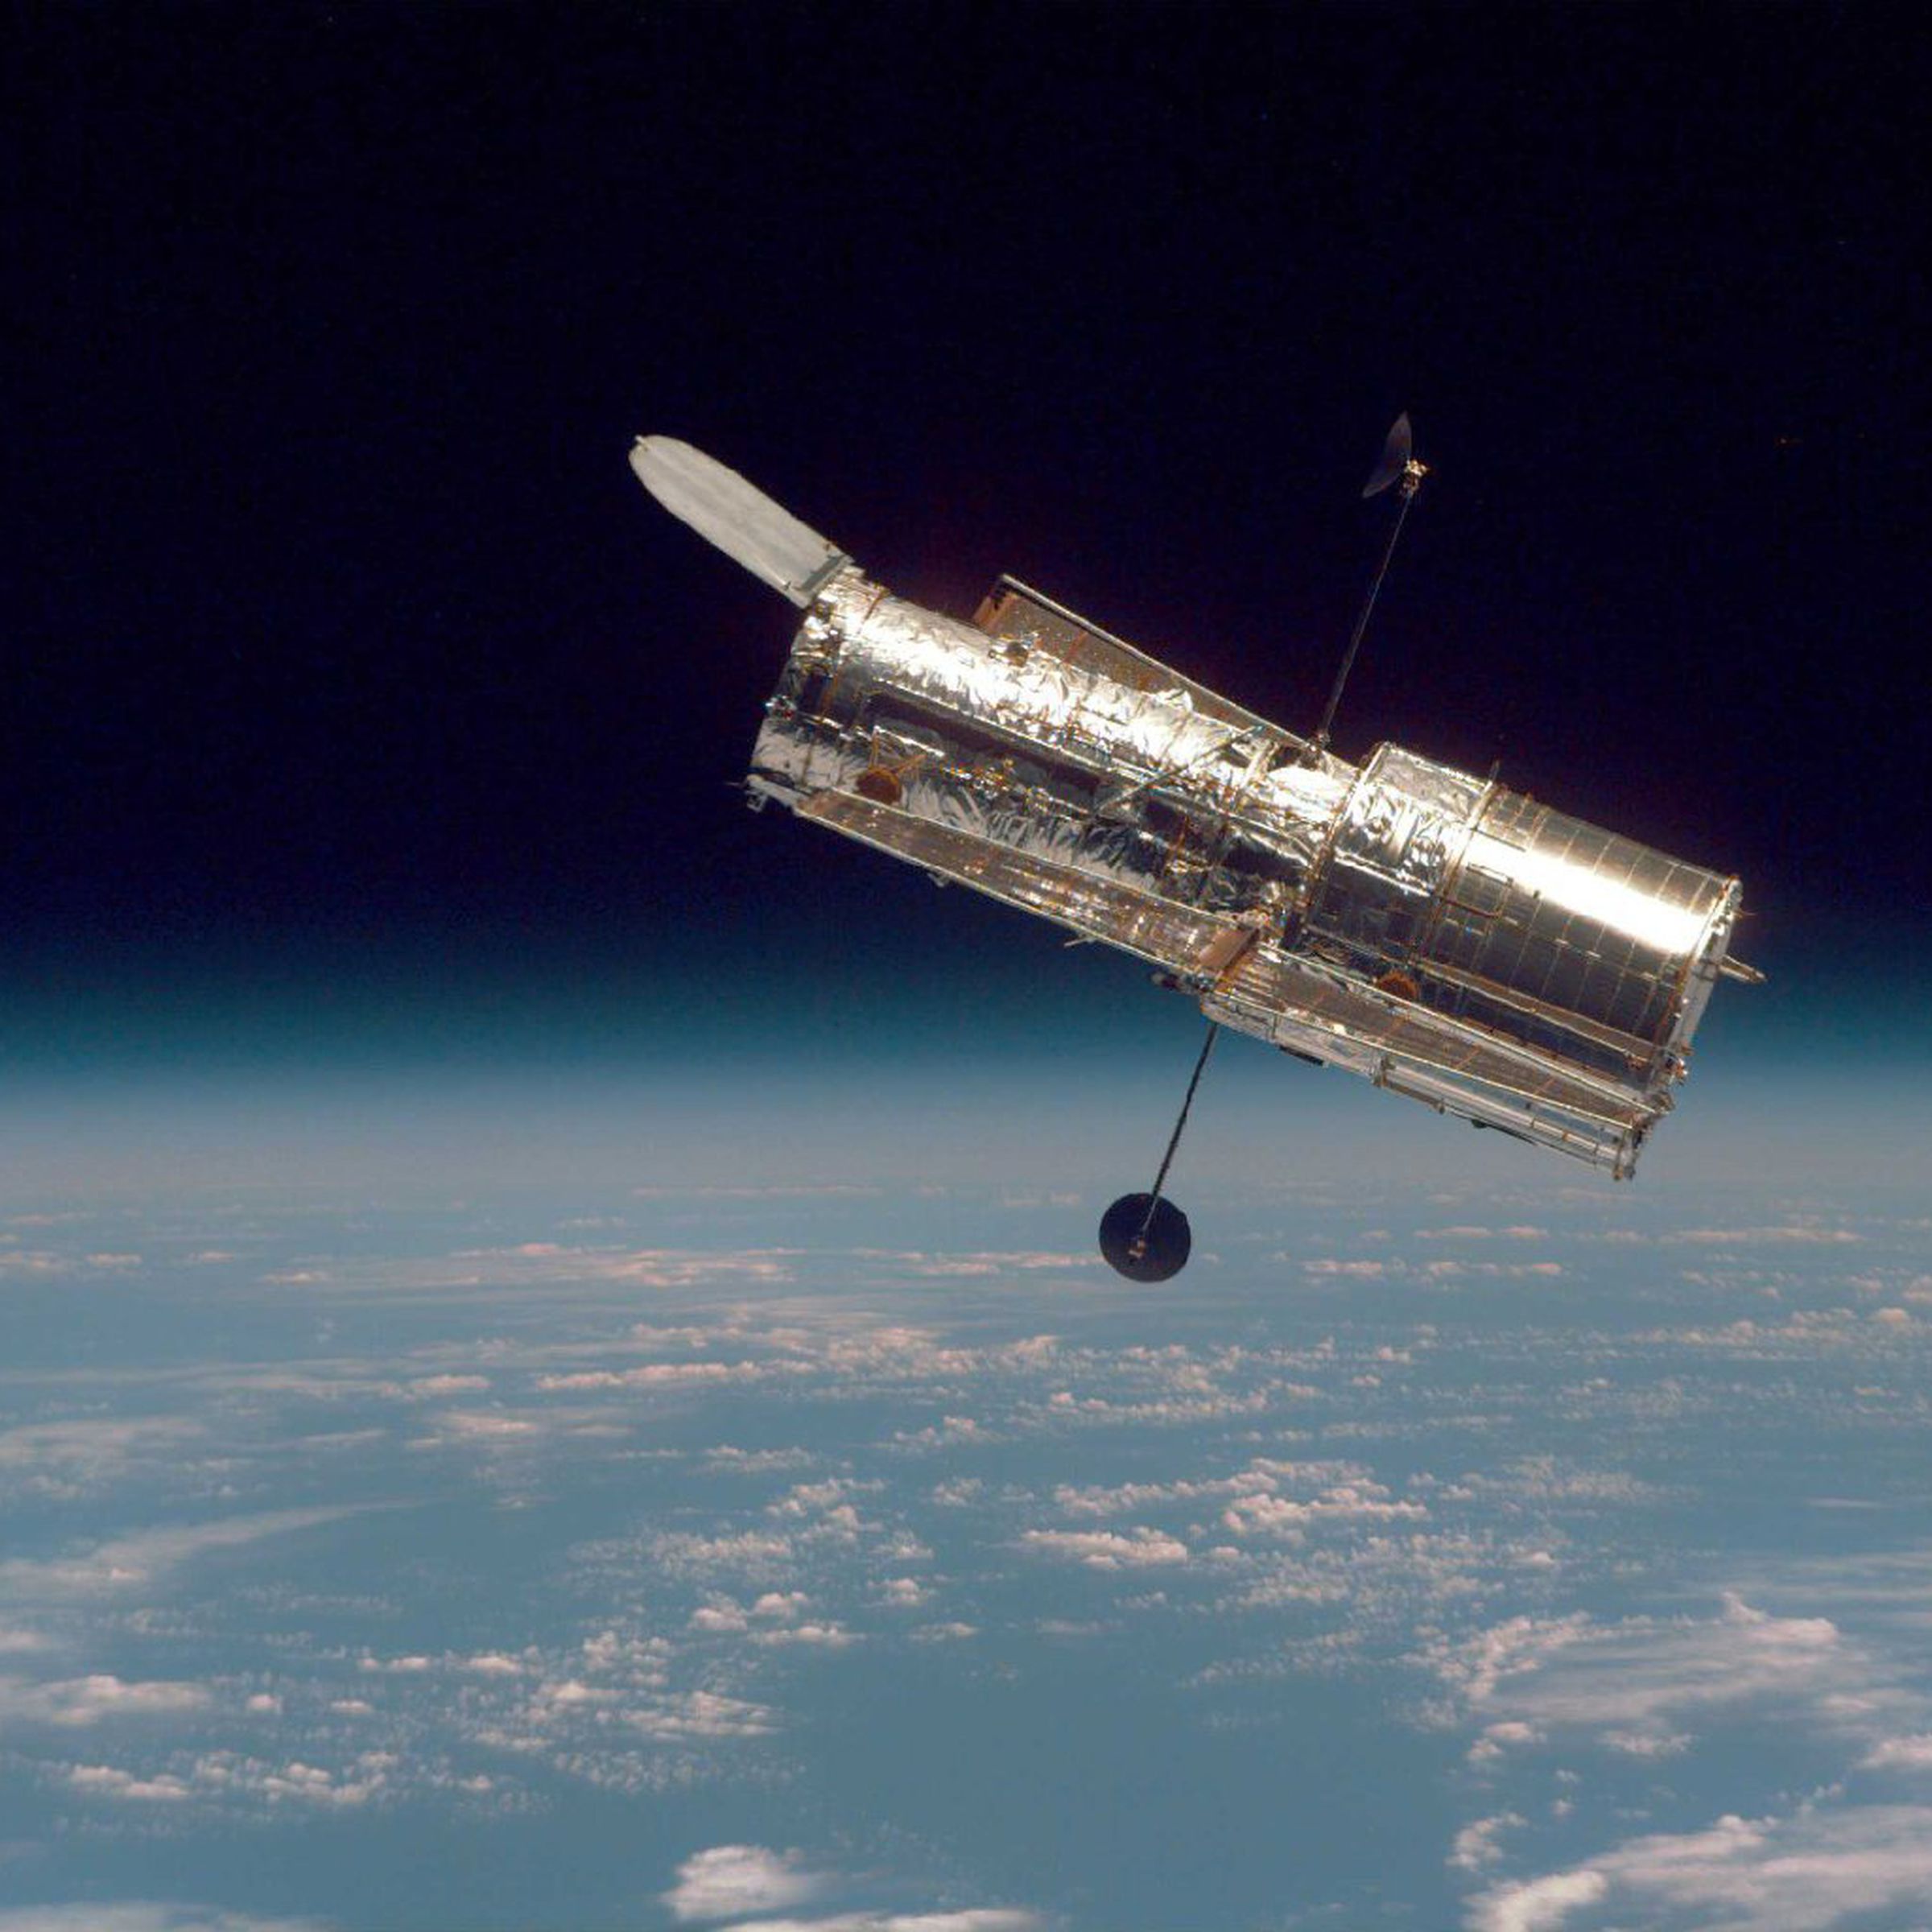 The Hubble Space Telescope, still going strong after more than 30 years in space.